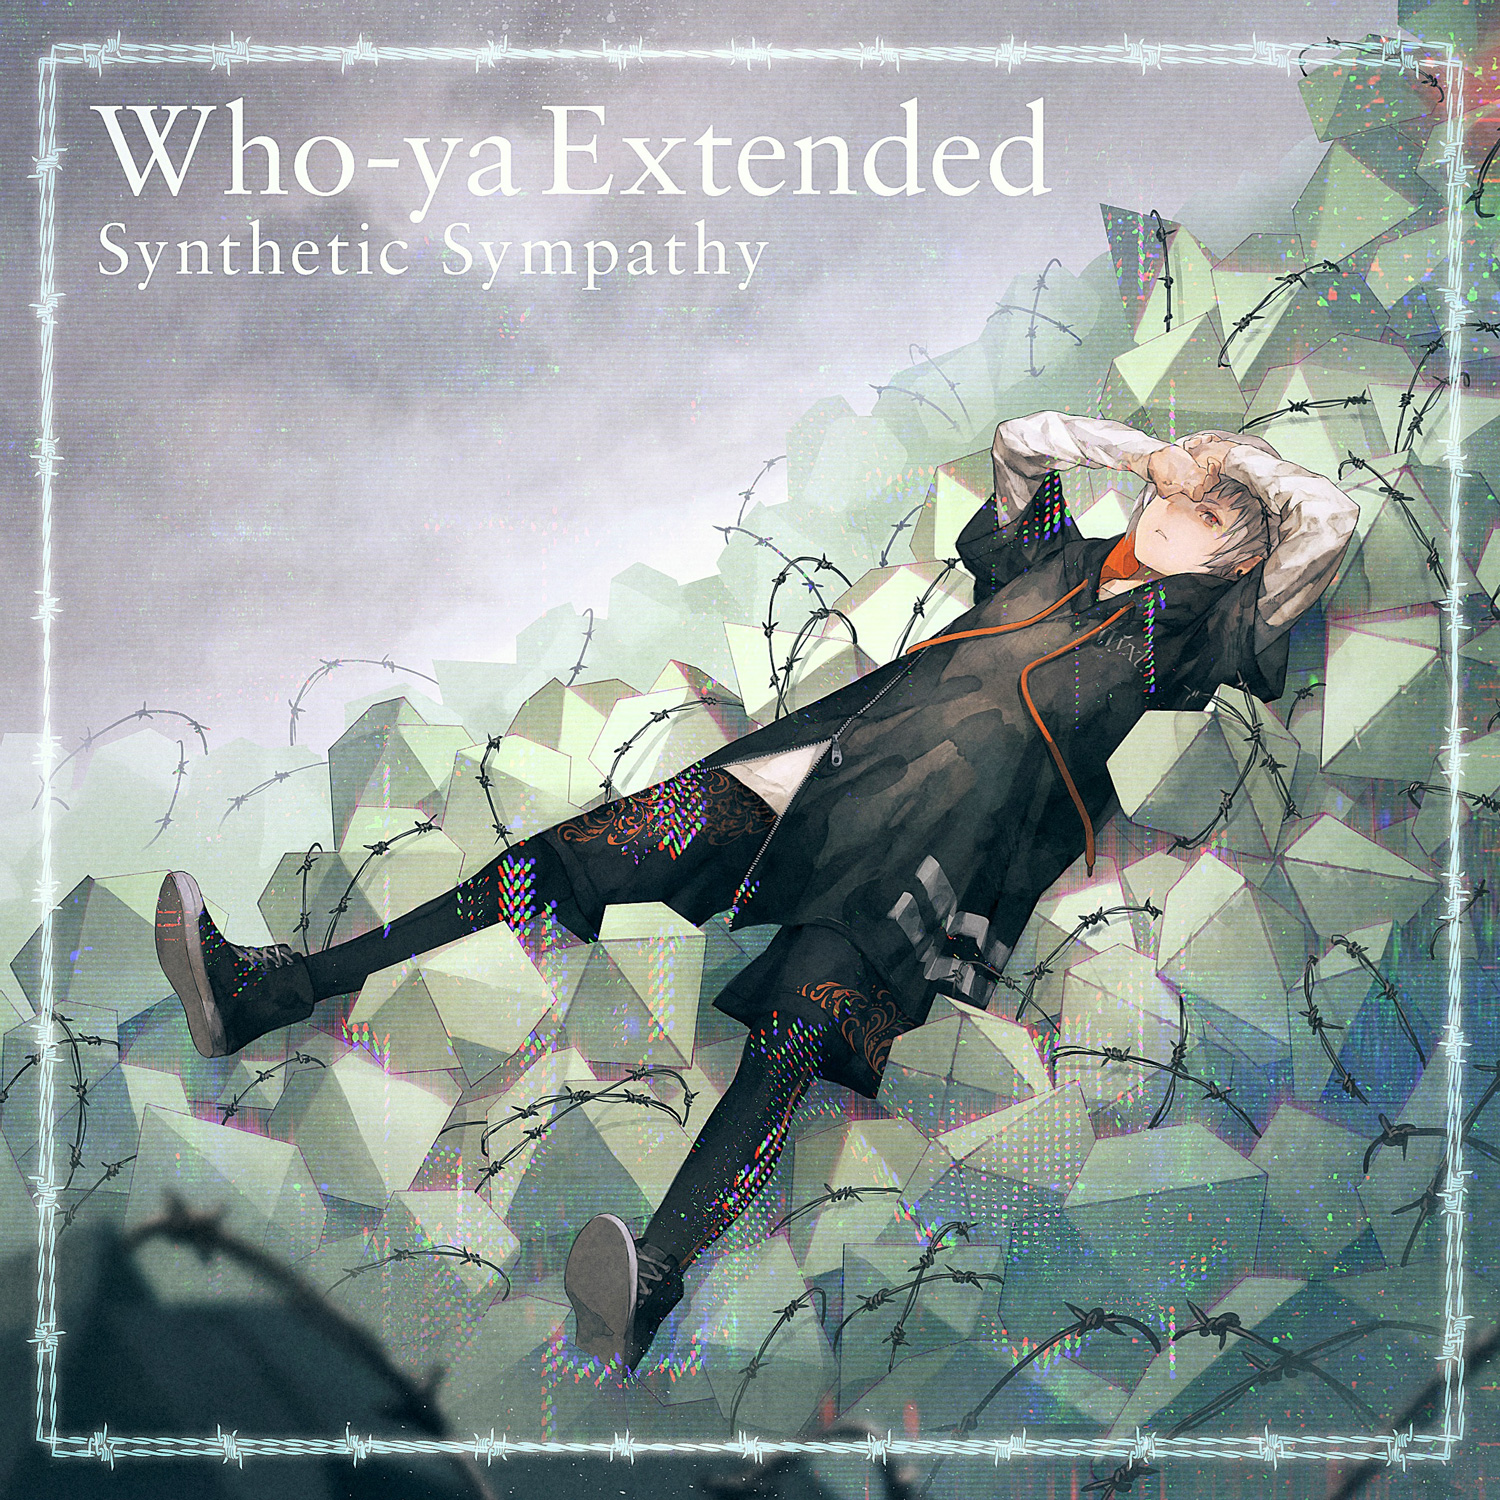 Psycho Pass 3 First Inspector Opening Theme Synthetic Sympathy By Who Ya Extended To Release Digitally Moshi Moshi Nippon もしもしにっぽん